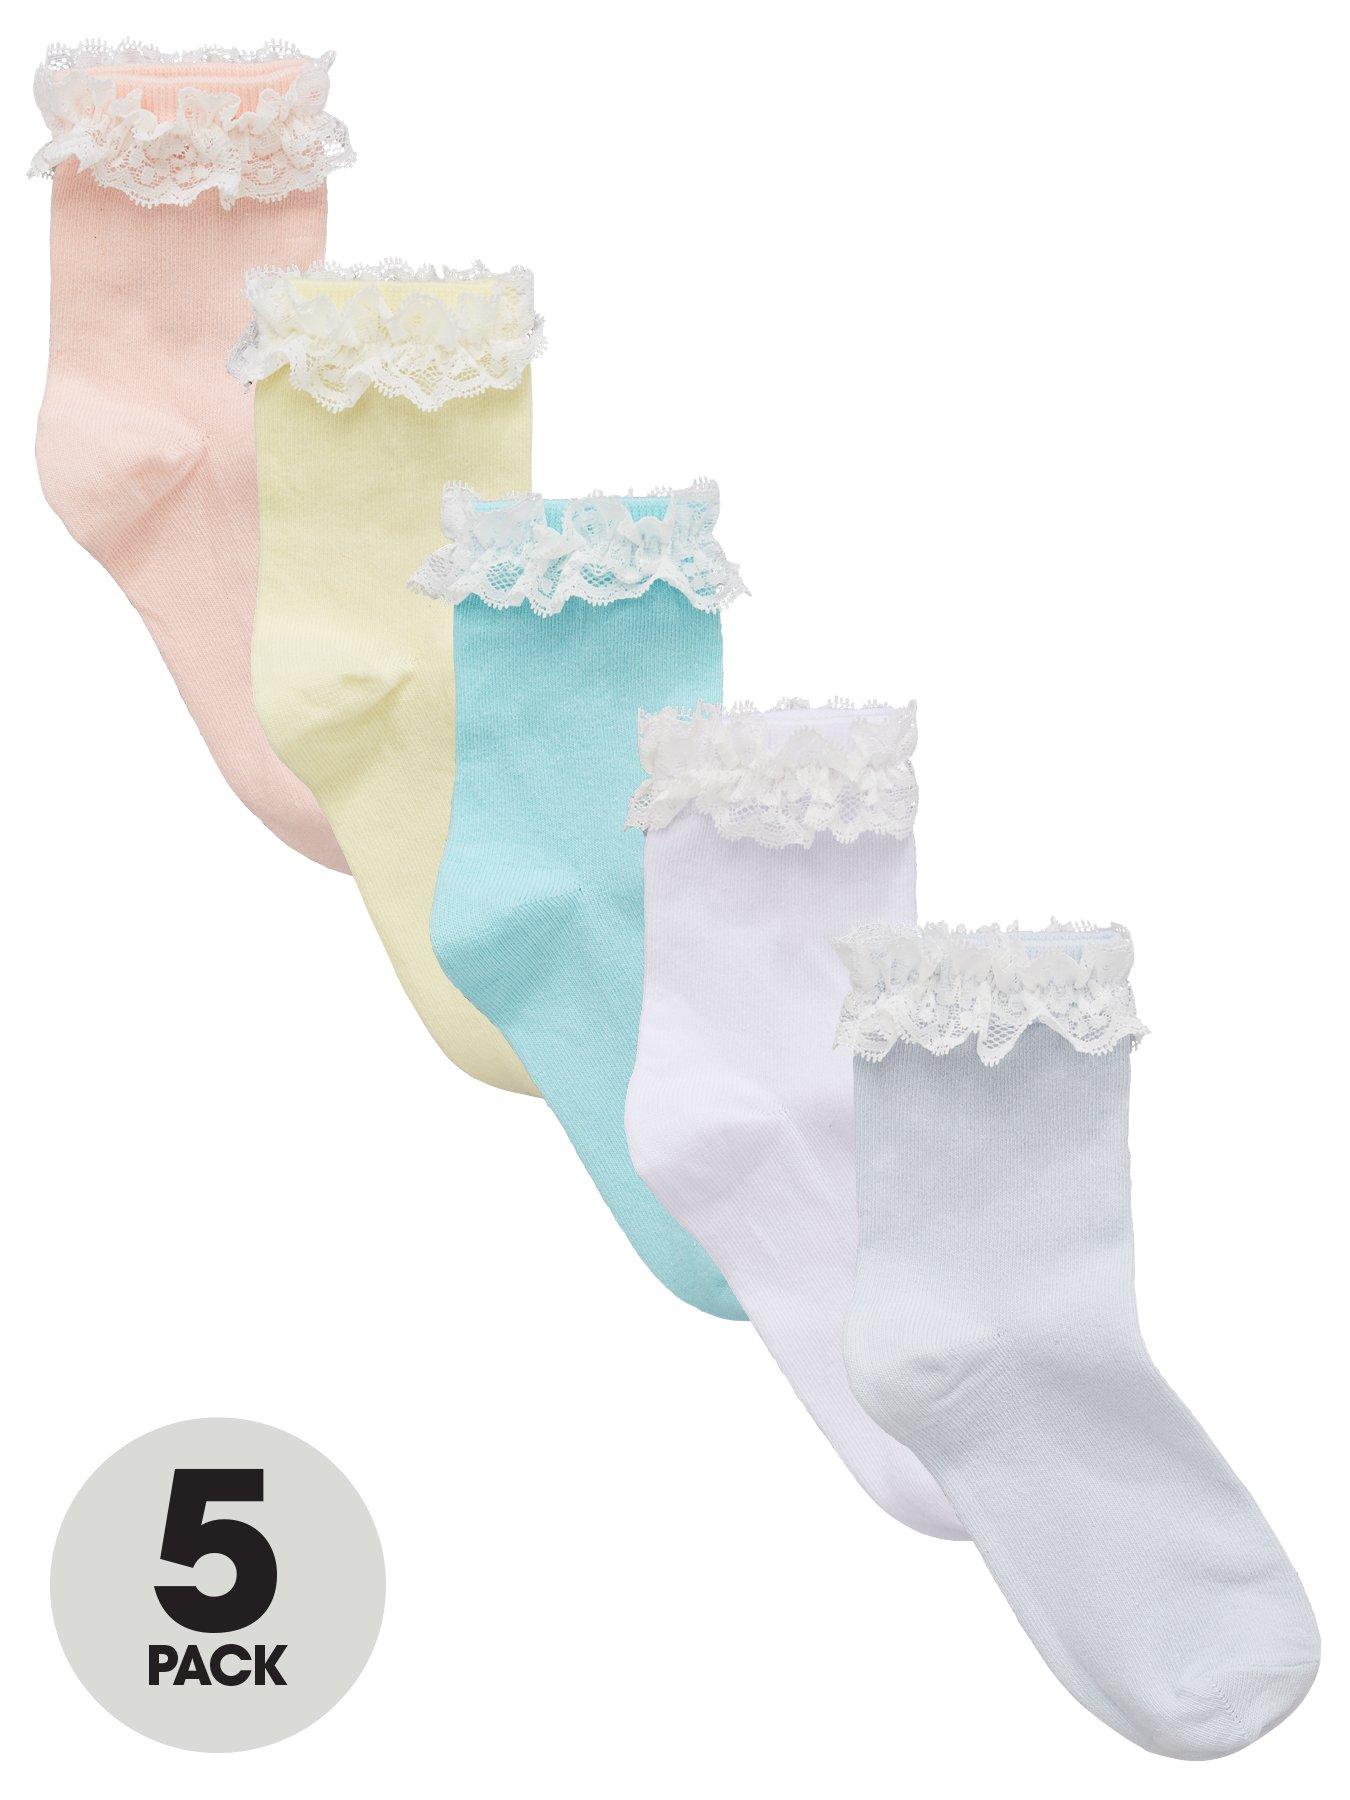 Baby Girls White Frilly Ankle Socks Heart Diamante Sparkle Lace 0-12 Months